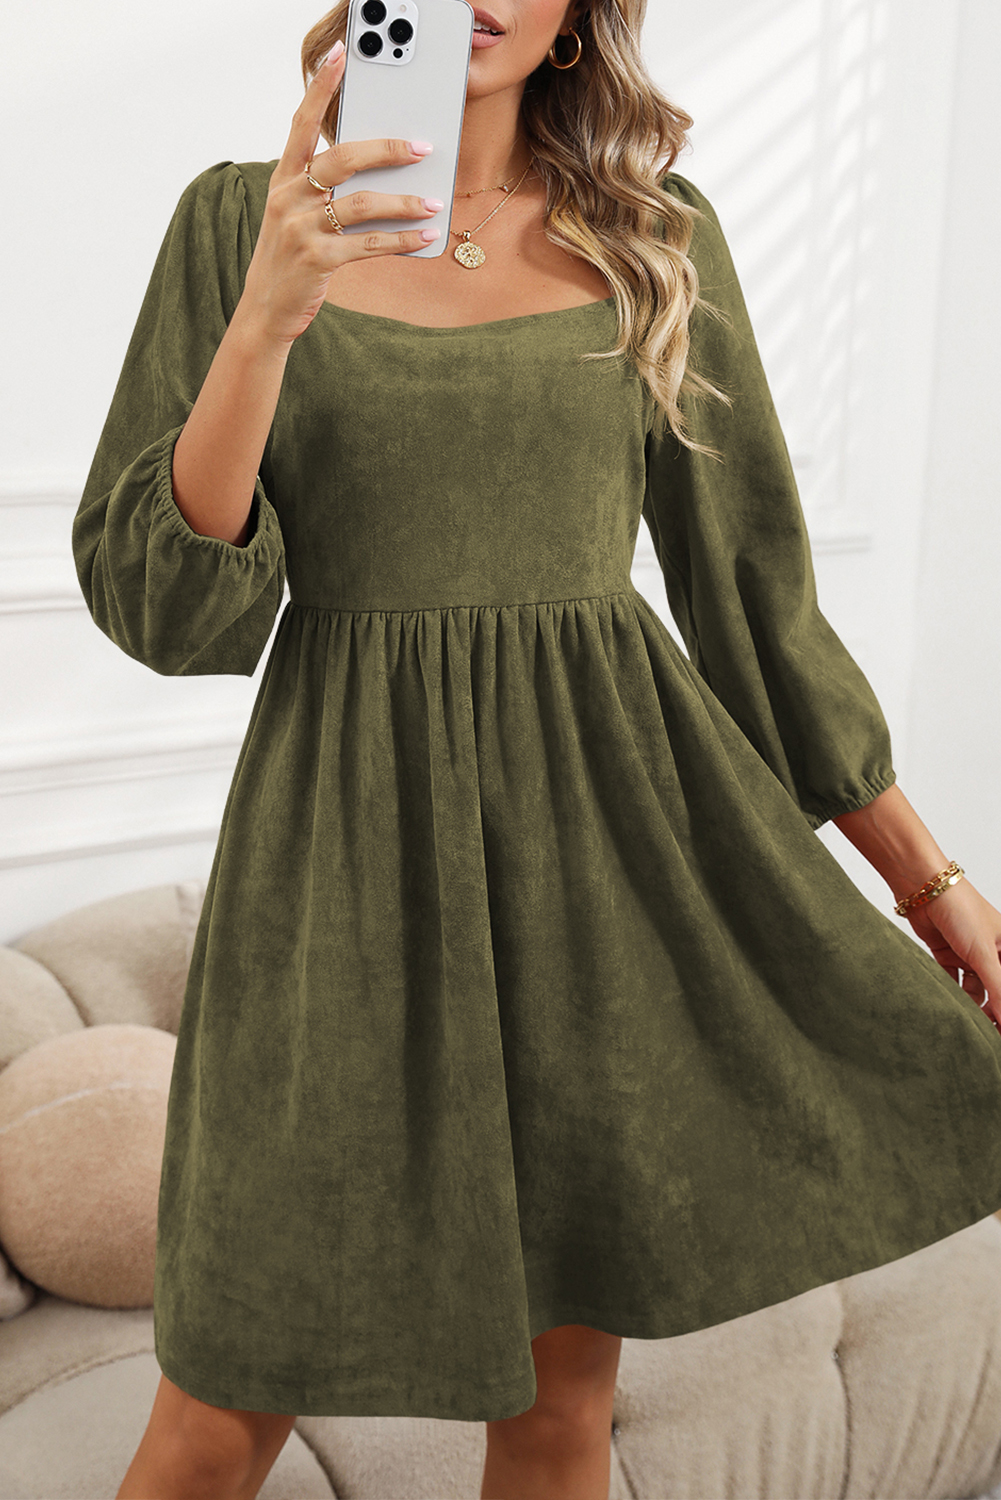 Shewin Wholesale Western Apparel Green Washed Square Neck High Waist Flared Short DRESS